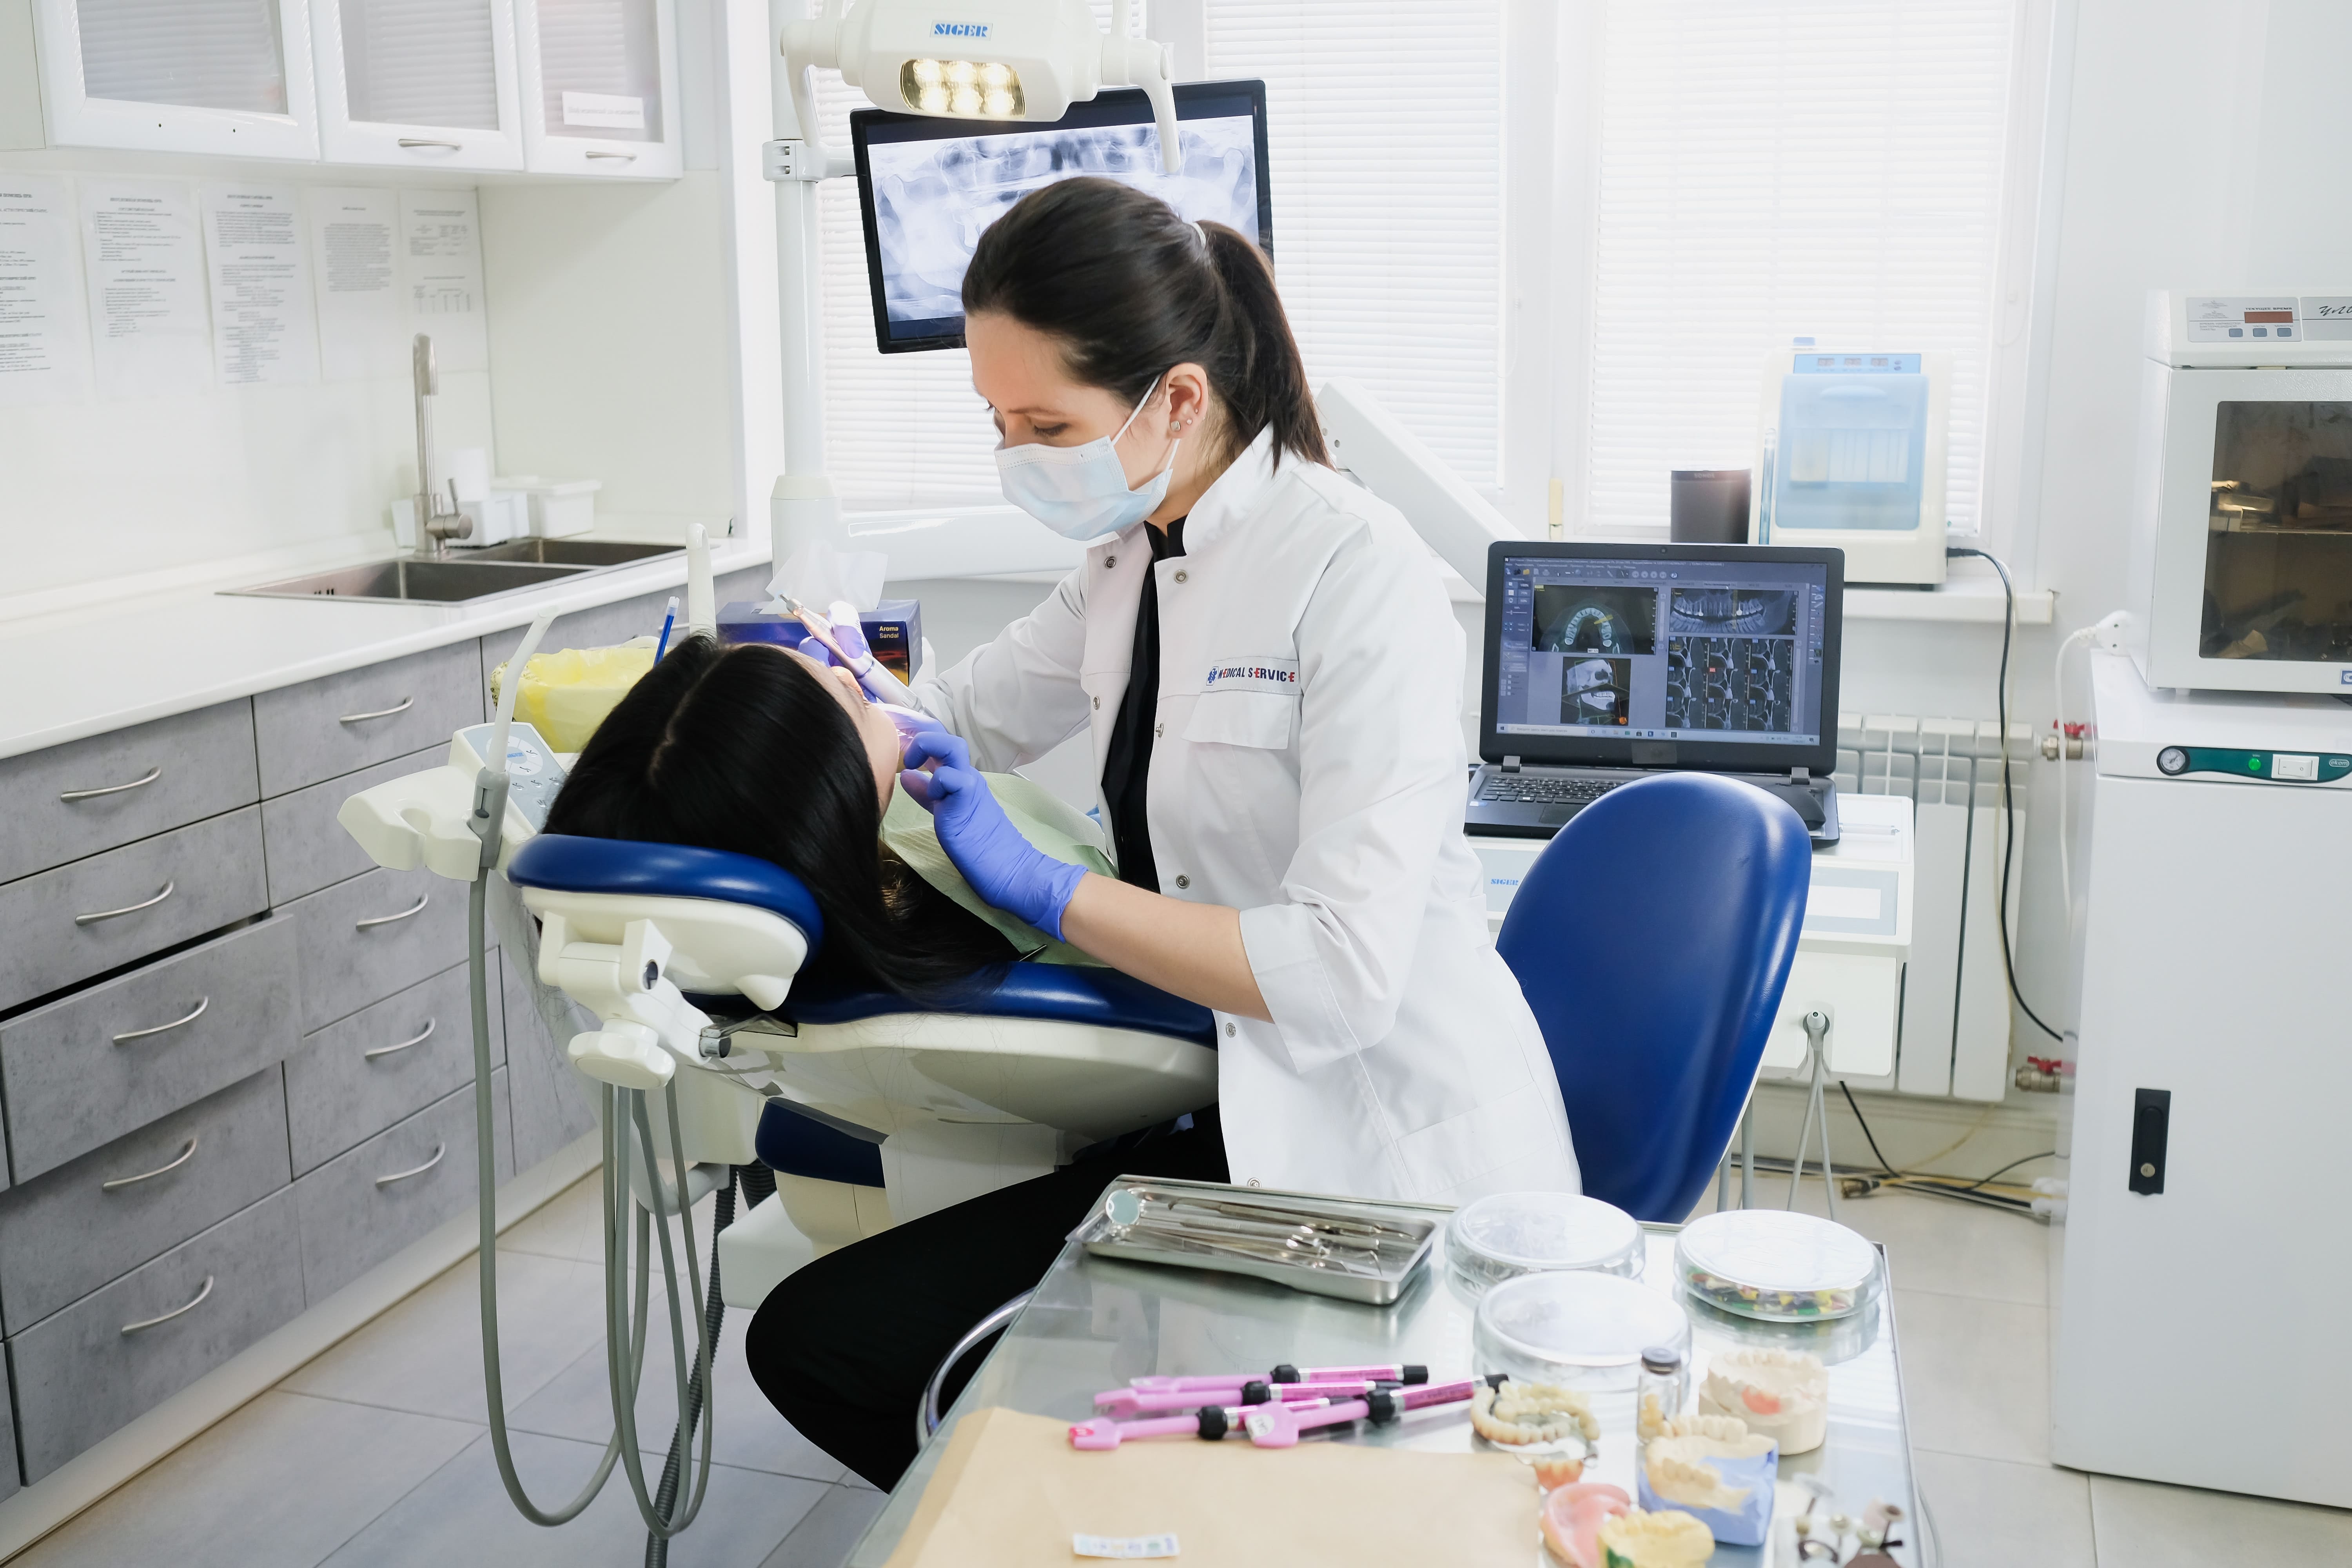 The tooth doctor applies the diagnostic solution method from the practice of dentistry to his patient